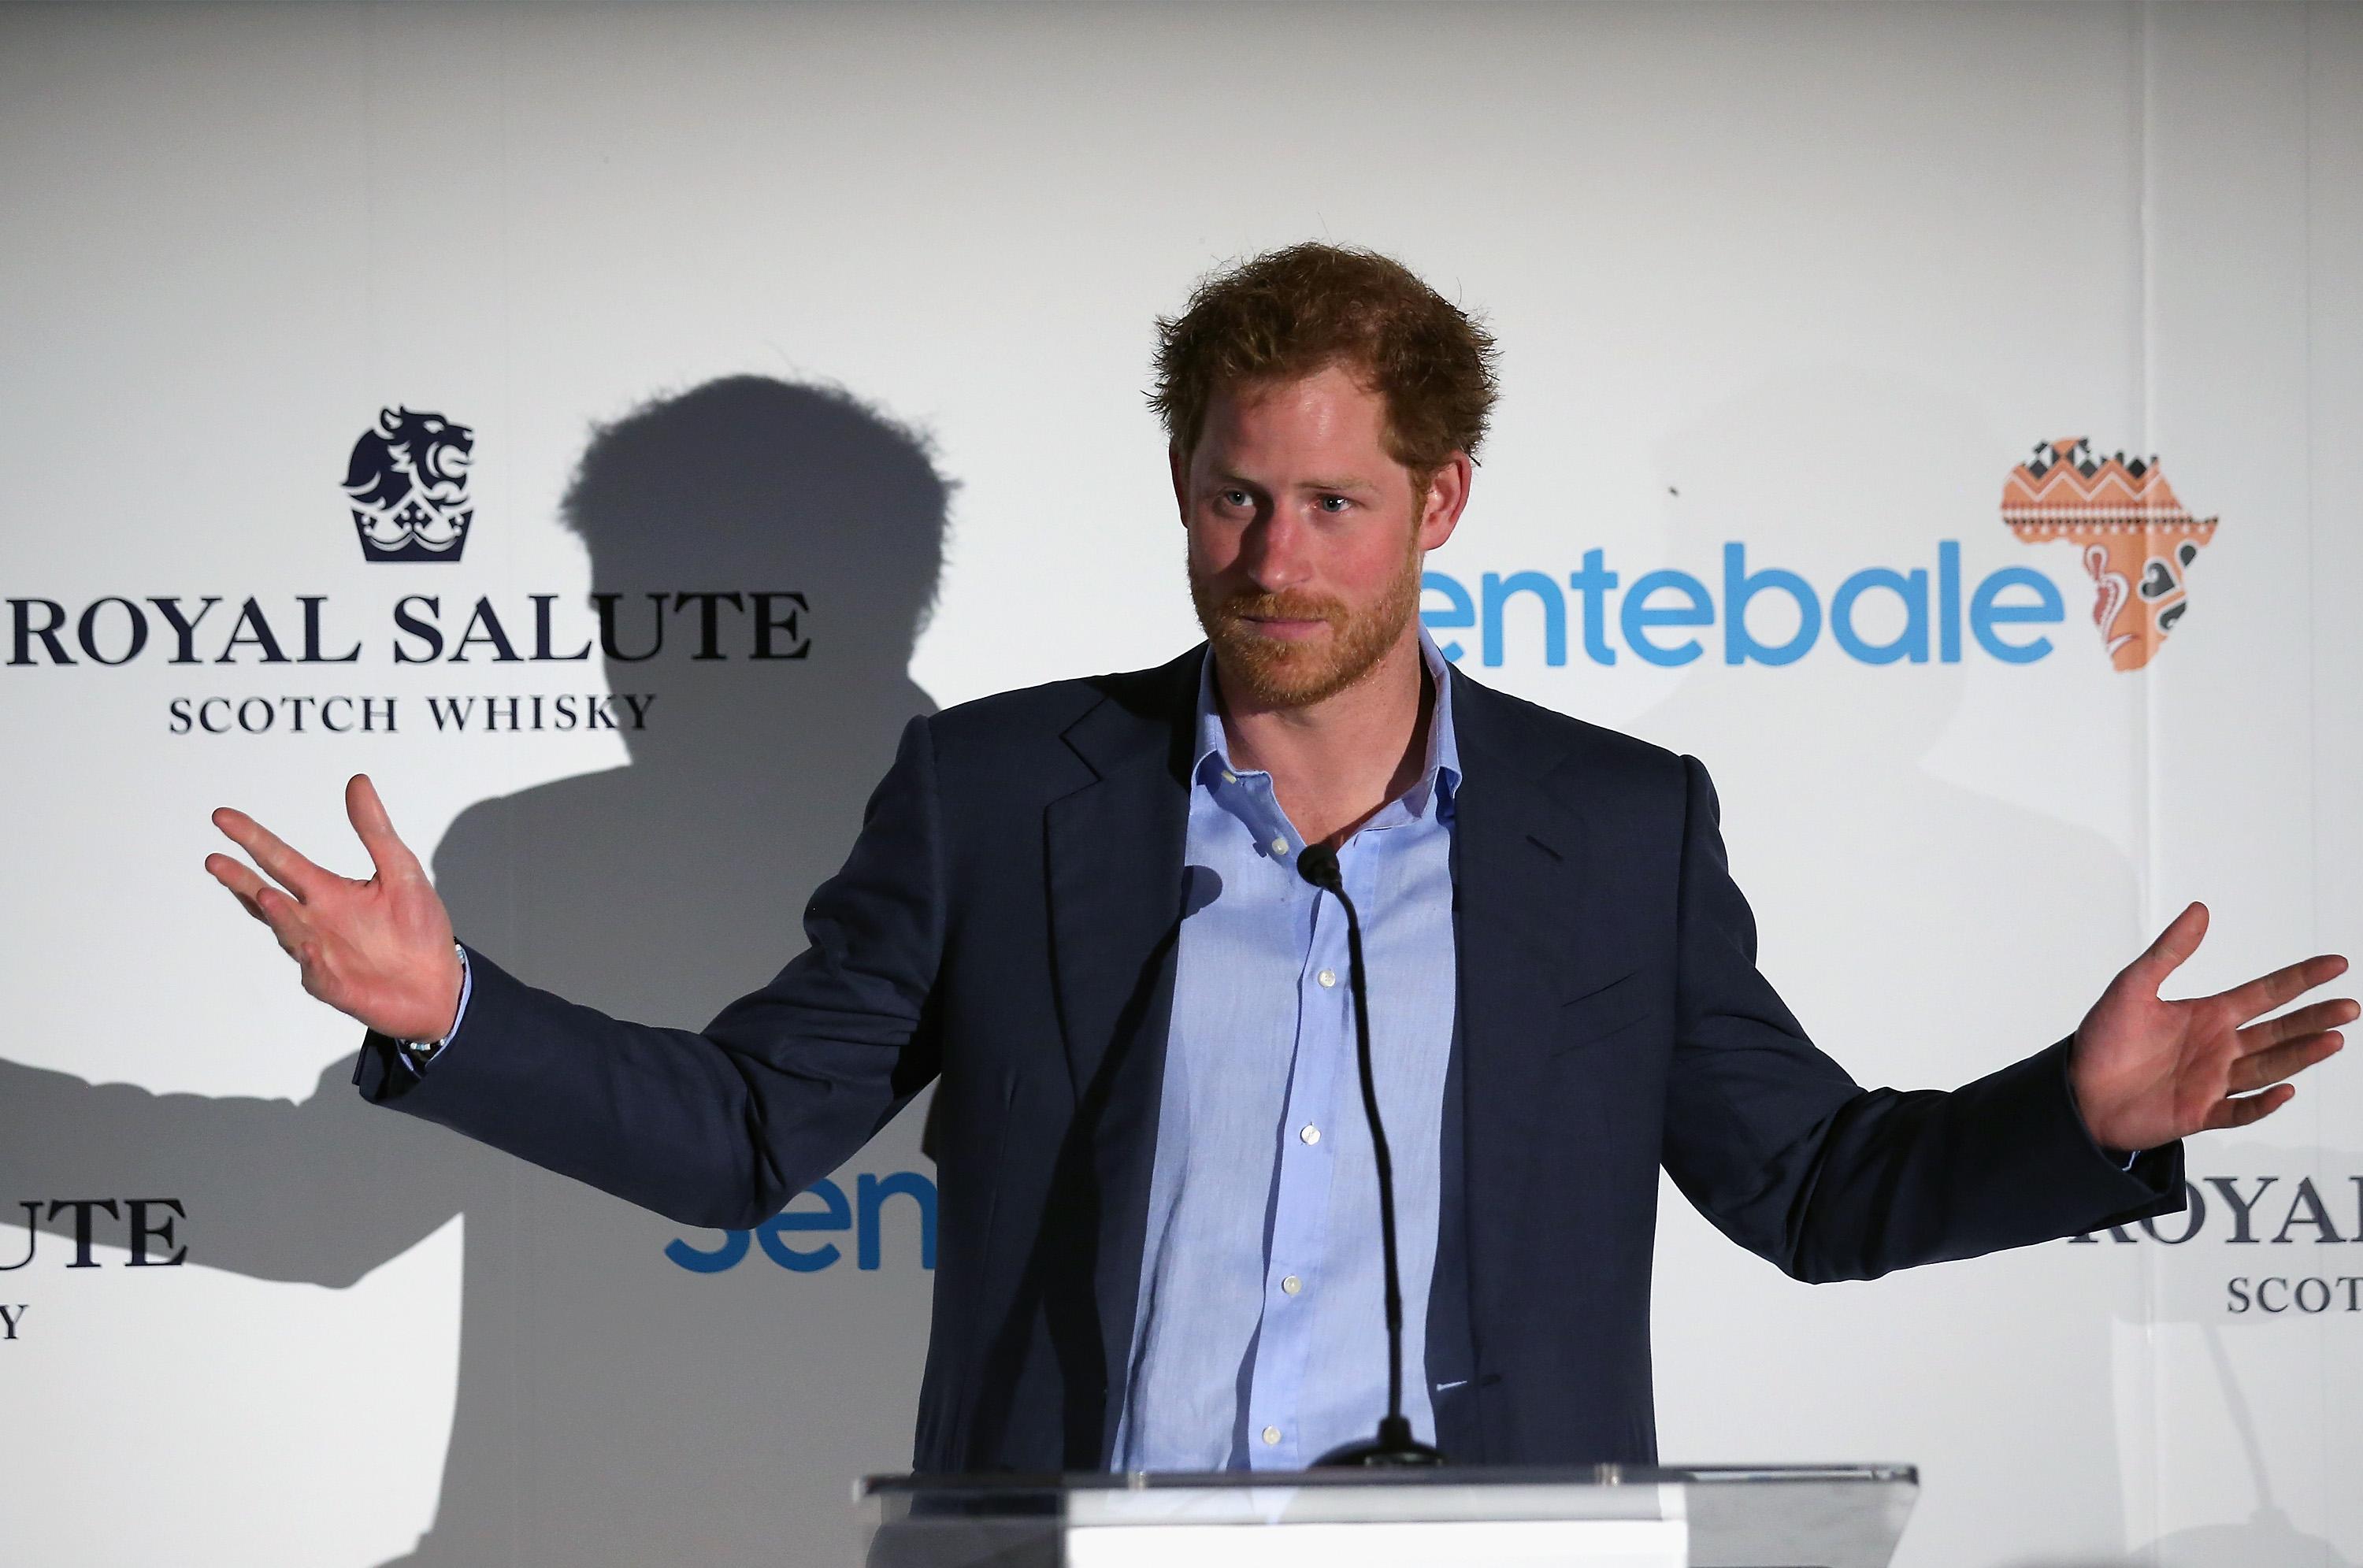 PRINCE HARRY TO EMBARK ON VISIT TO SINGAPORE FOR SENTEBALE ROYAL SALUTE POLO CUP